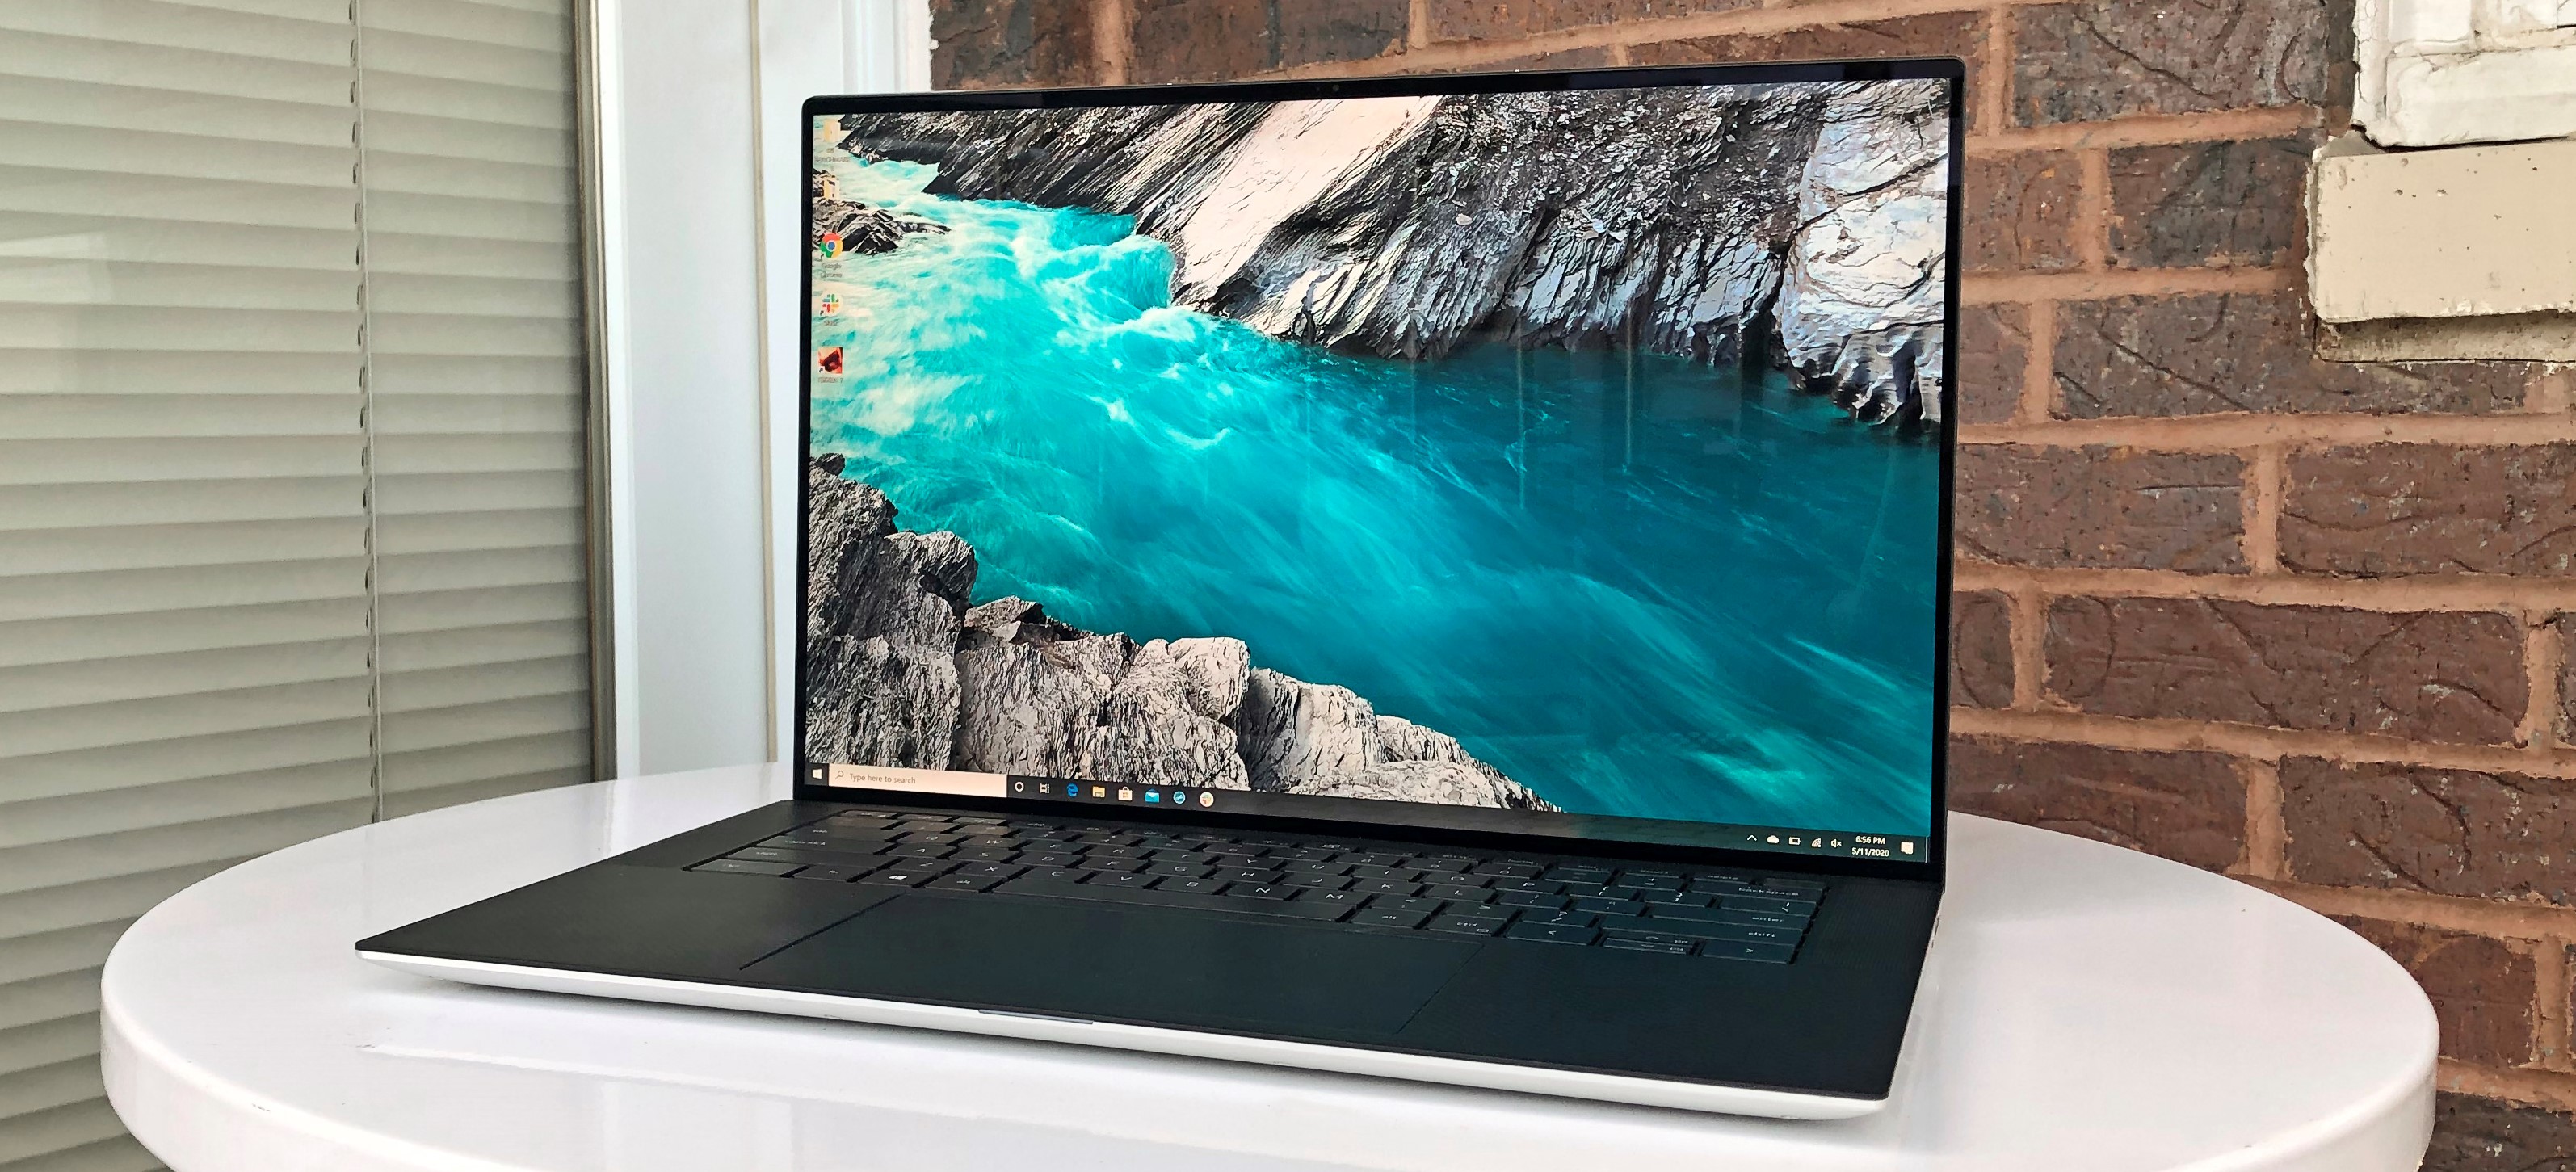 https://www.notebookcheck.net/Dell-XPS-15-9500-Core-i5-Review-Now-Even-More-Like-a-MacBook-Pro.html